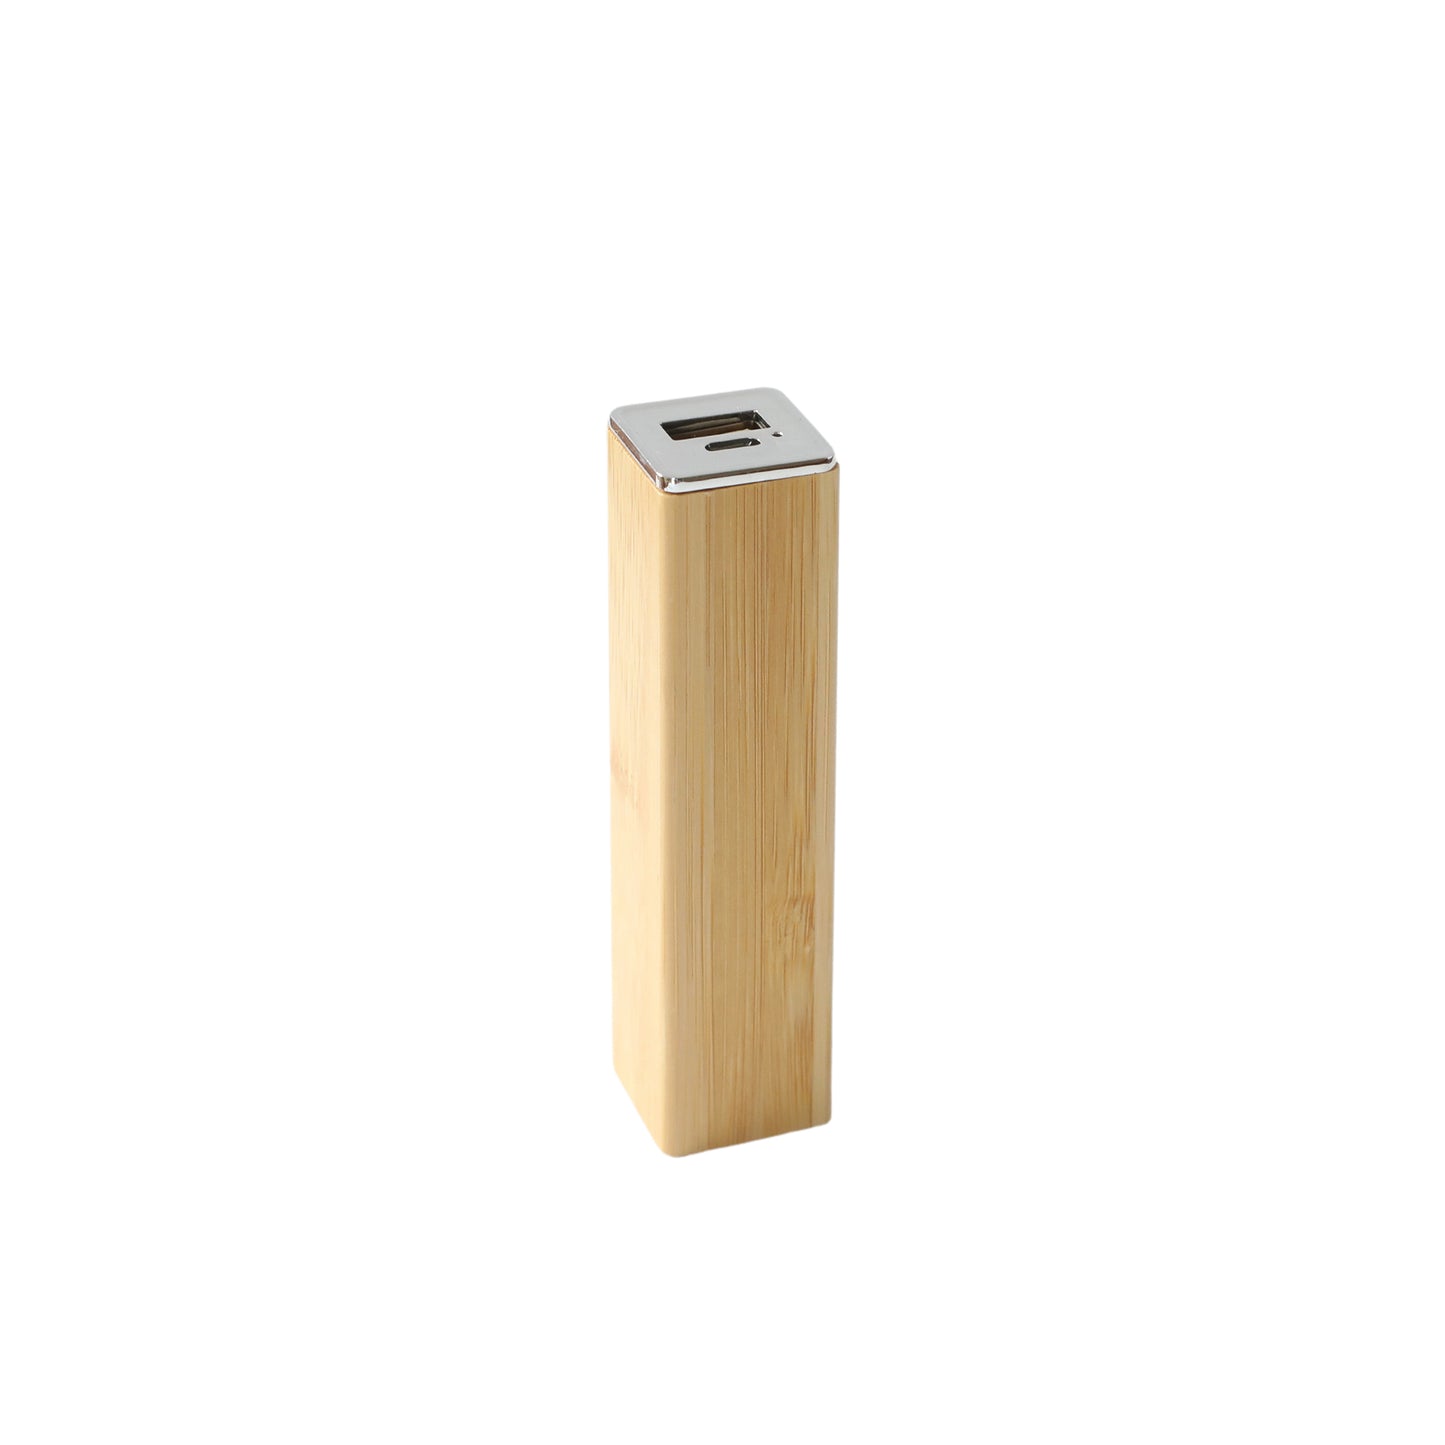 Square Tube Bamboo Power Bank Charger